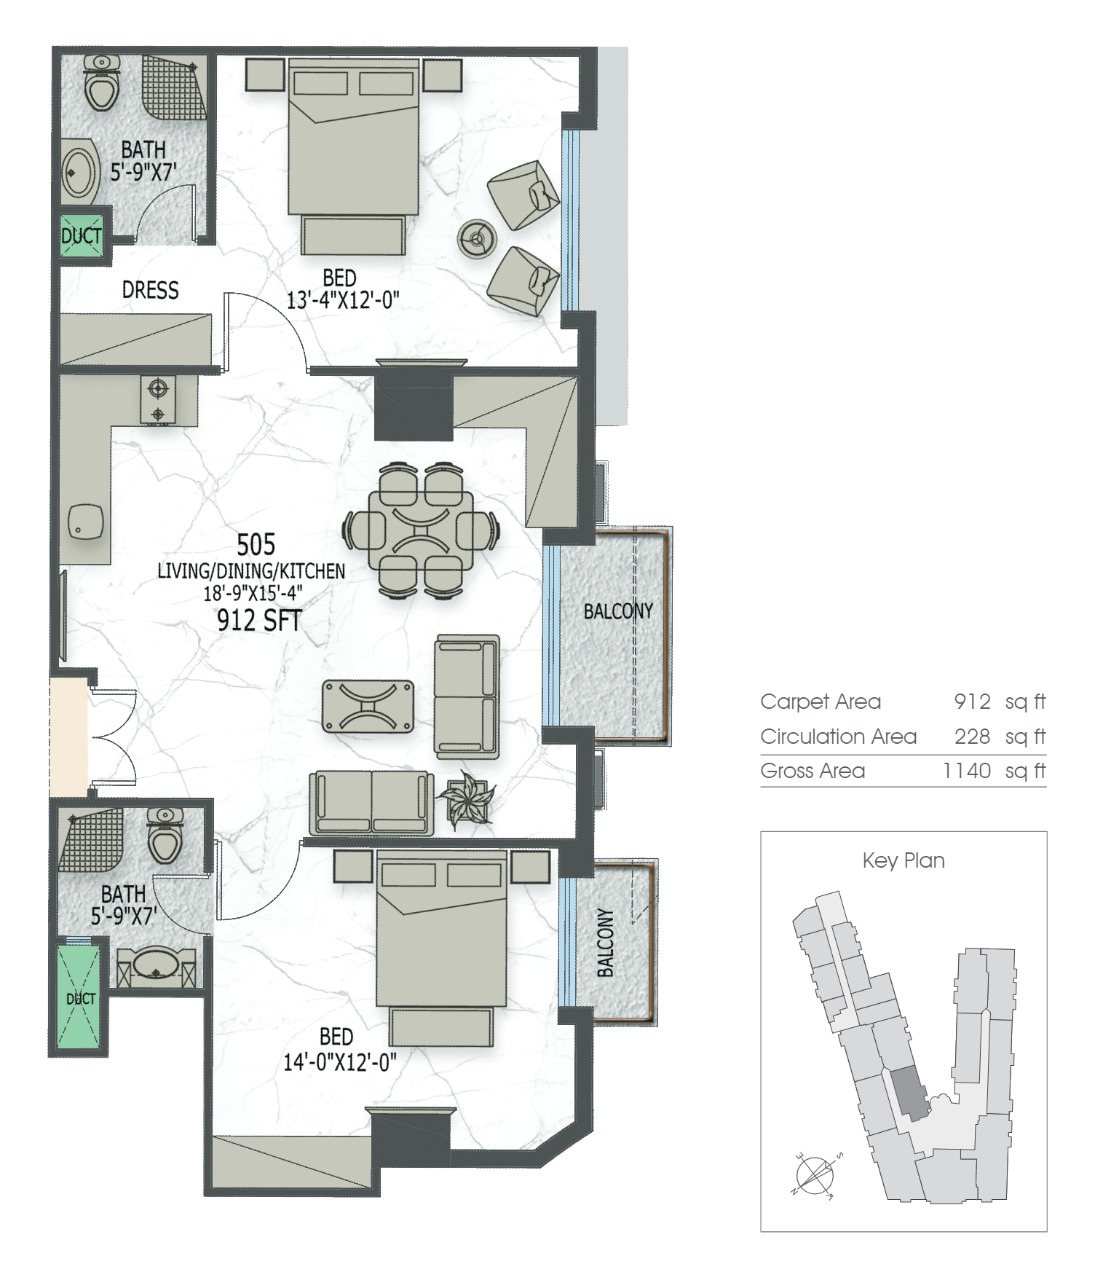 2 Bed Apartment Layout 7 Canal Residence South